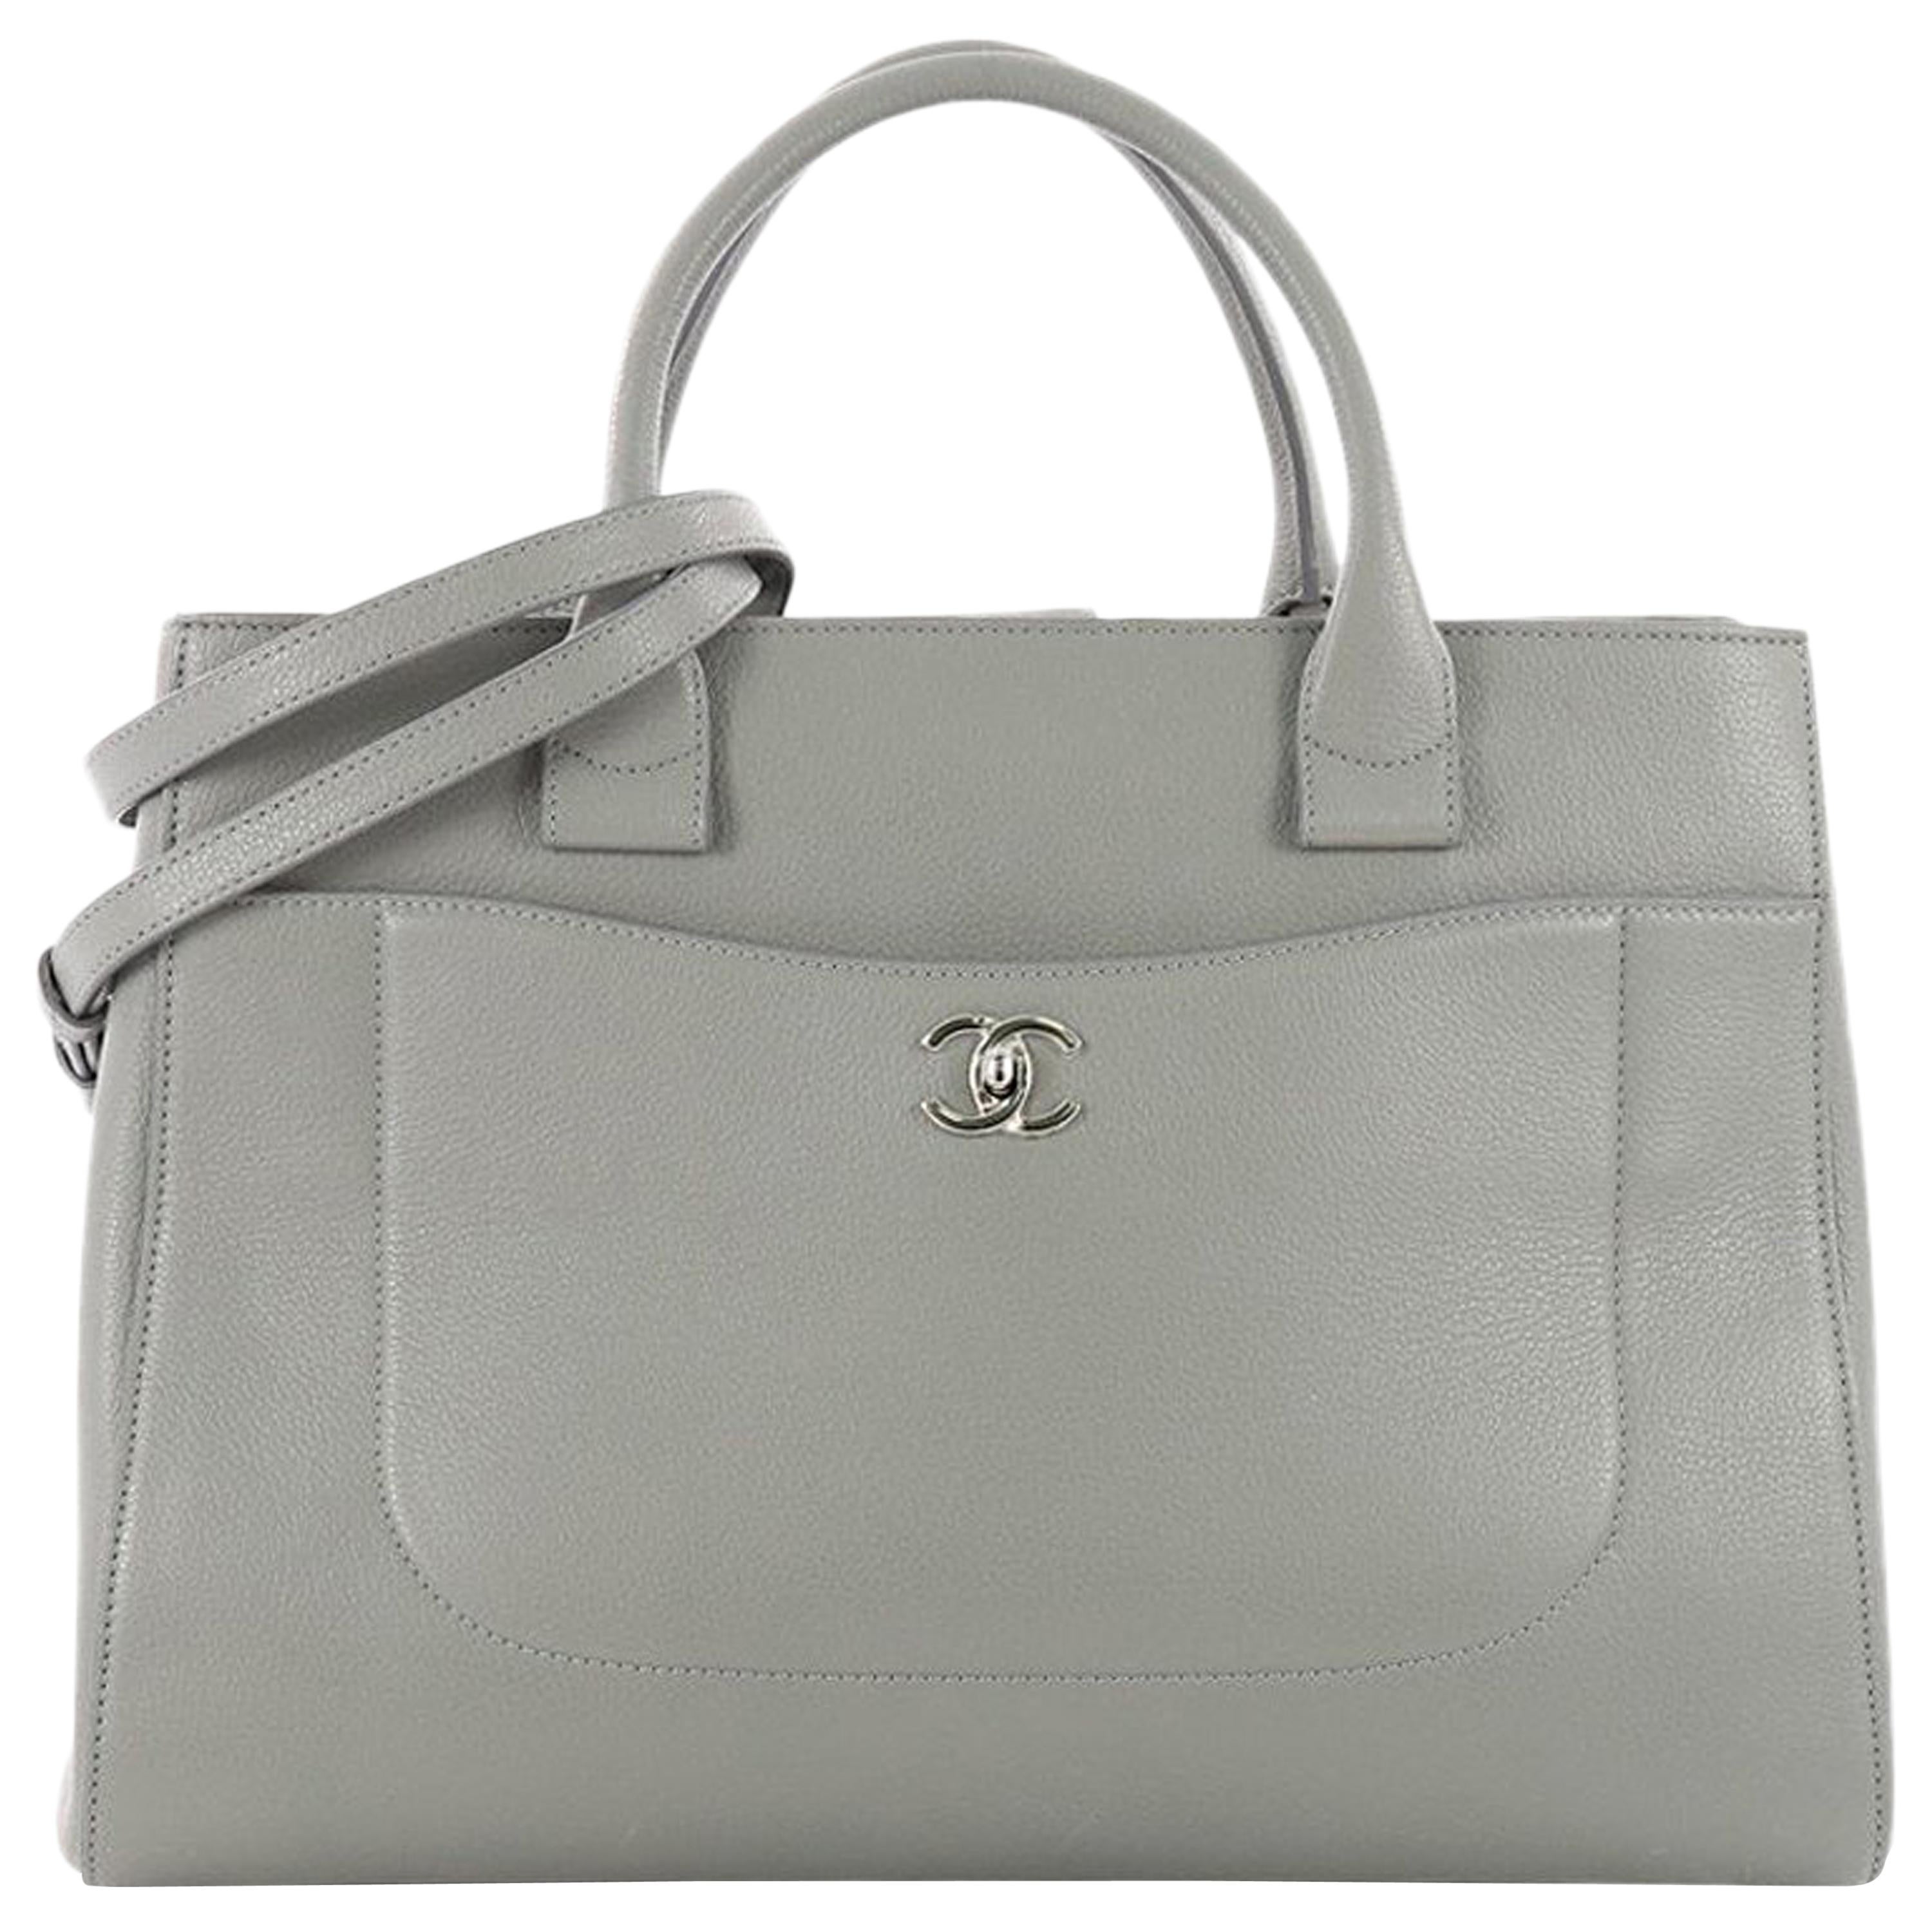 Chanel  Executive Cerf Tote bag in Latvia